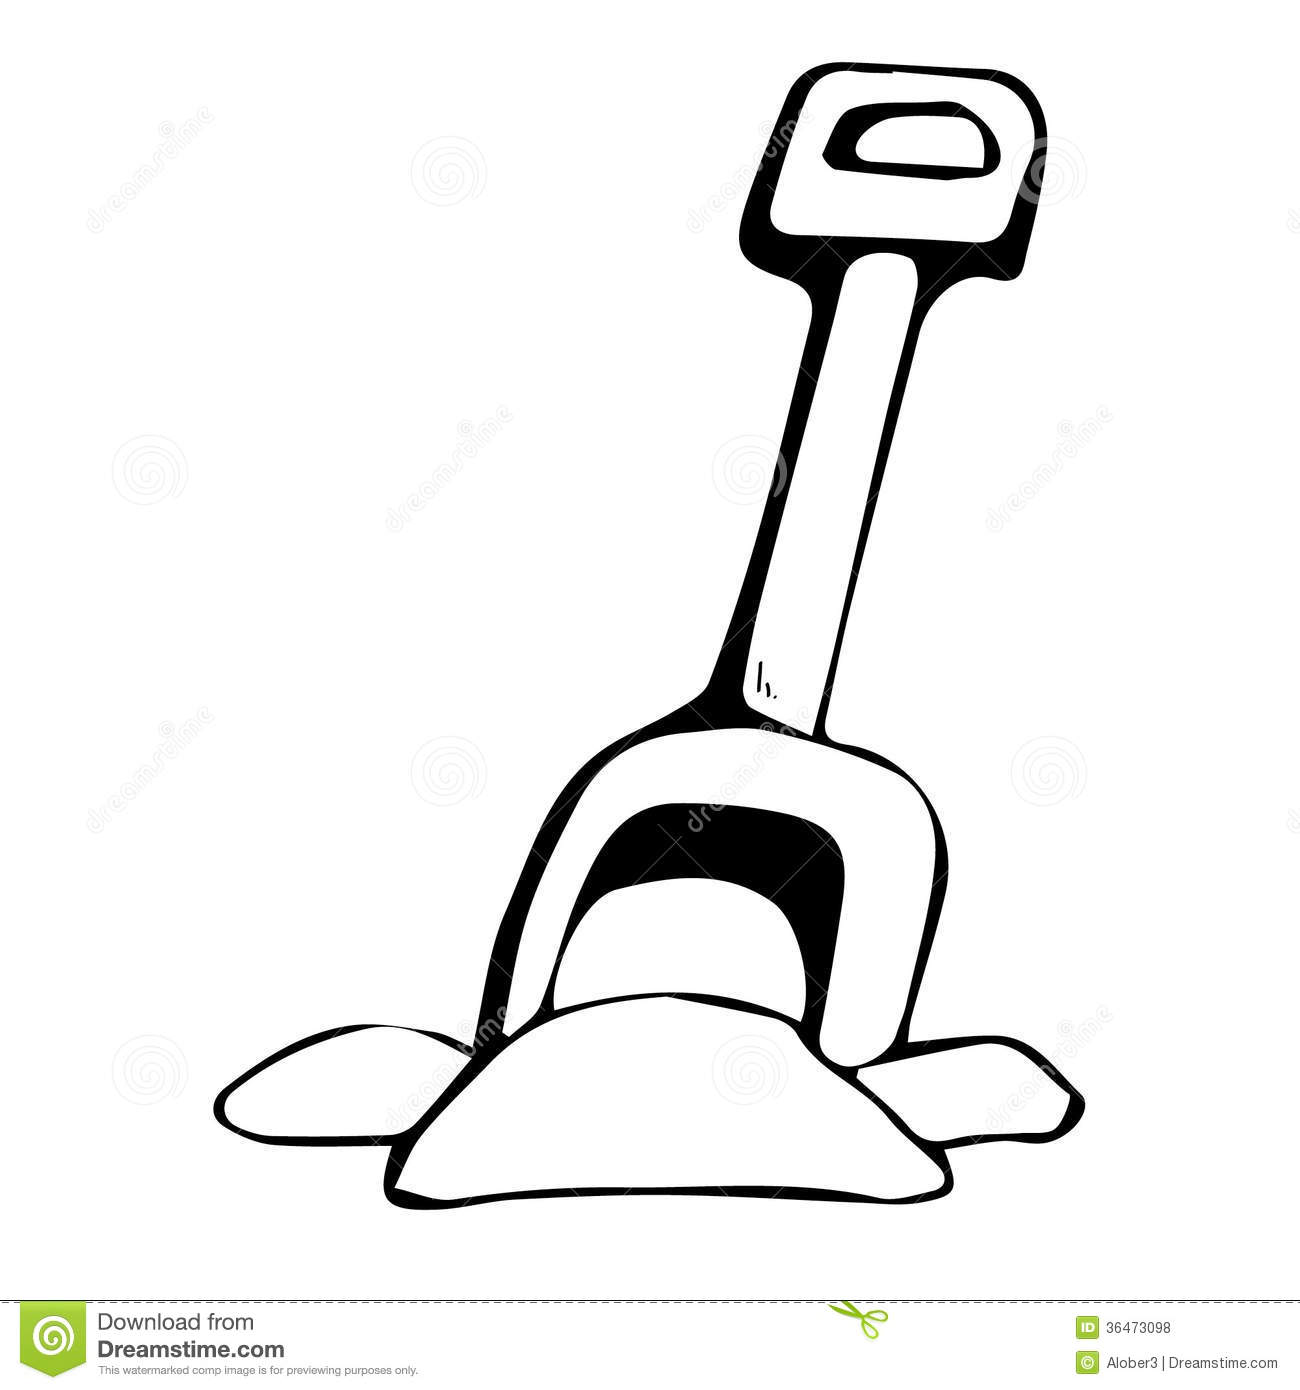 Black And White Hand Drawn Sketch Of A Toy Shovel Digging Into The